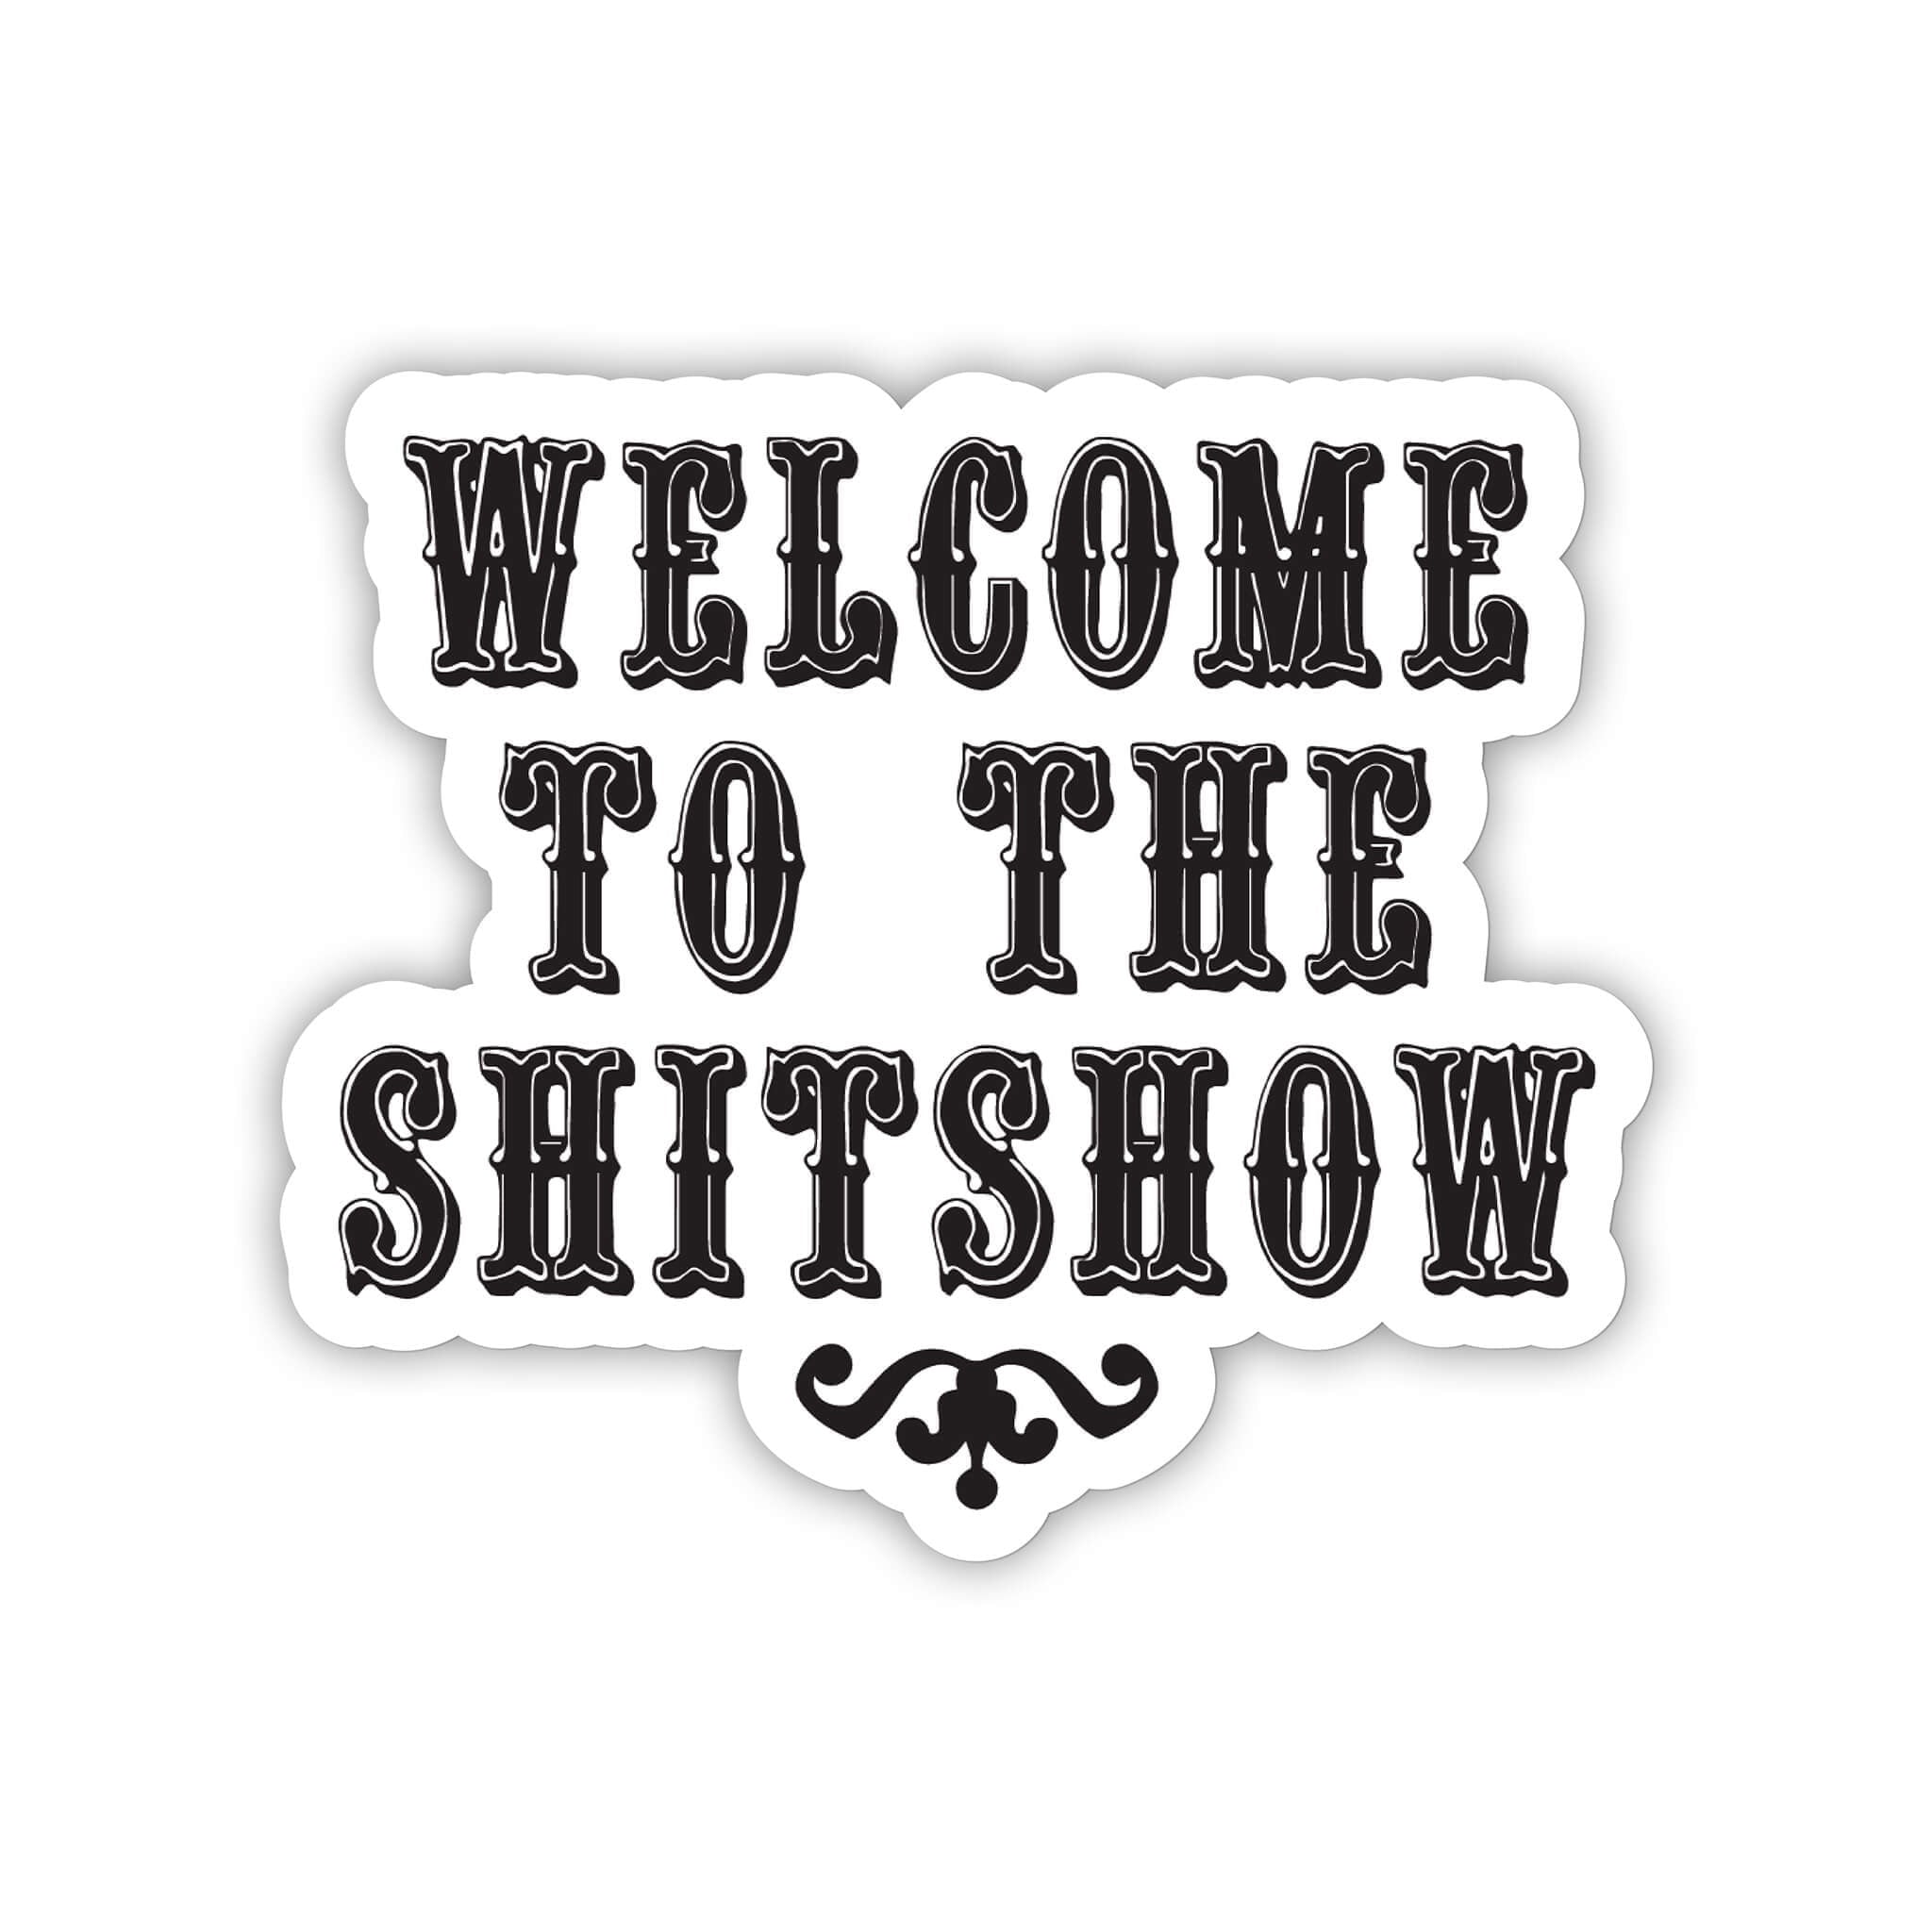 Welcome To The Shitshow Sticker - Twisted Wares®